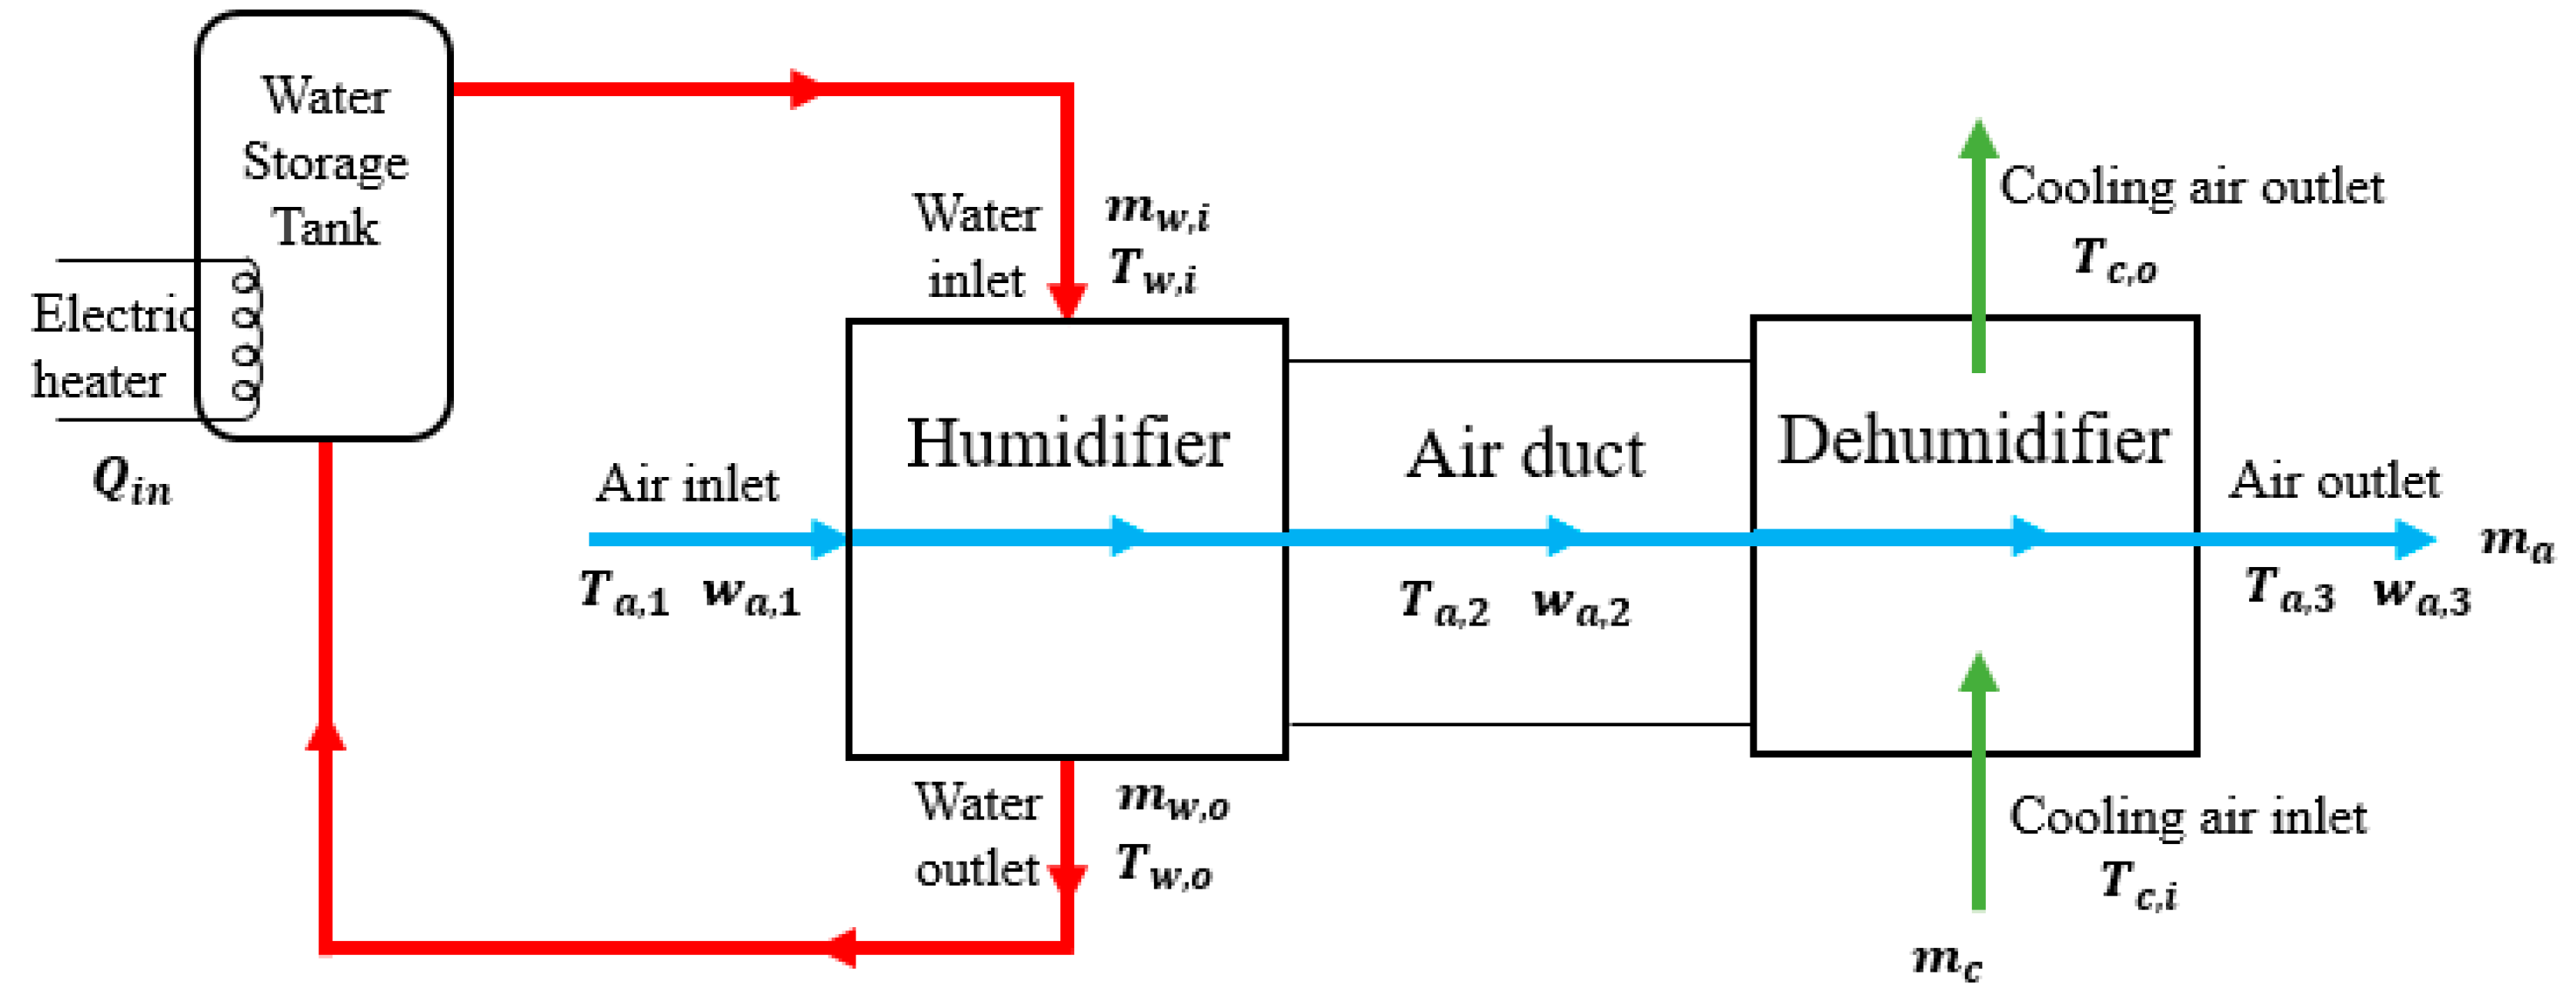 humidifier system